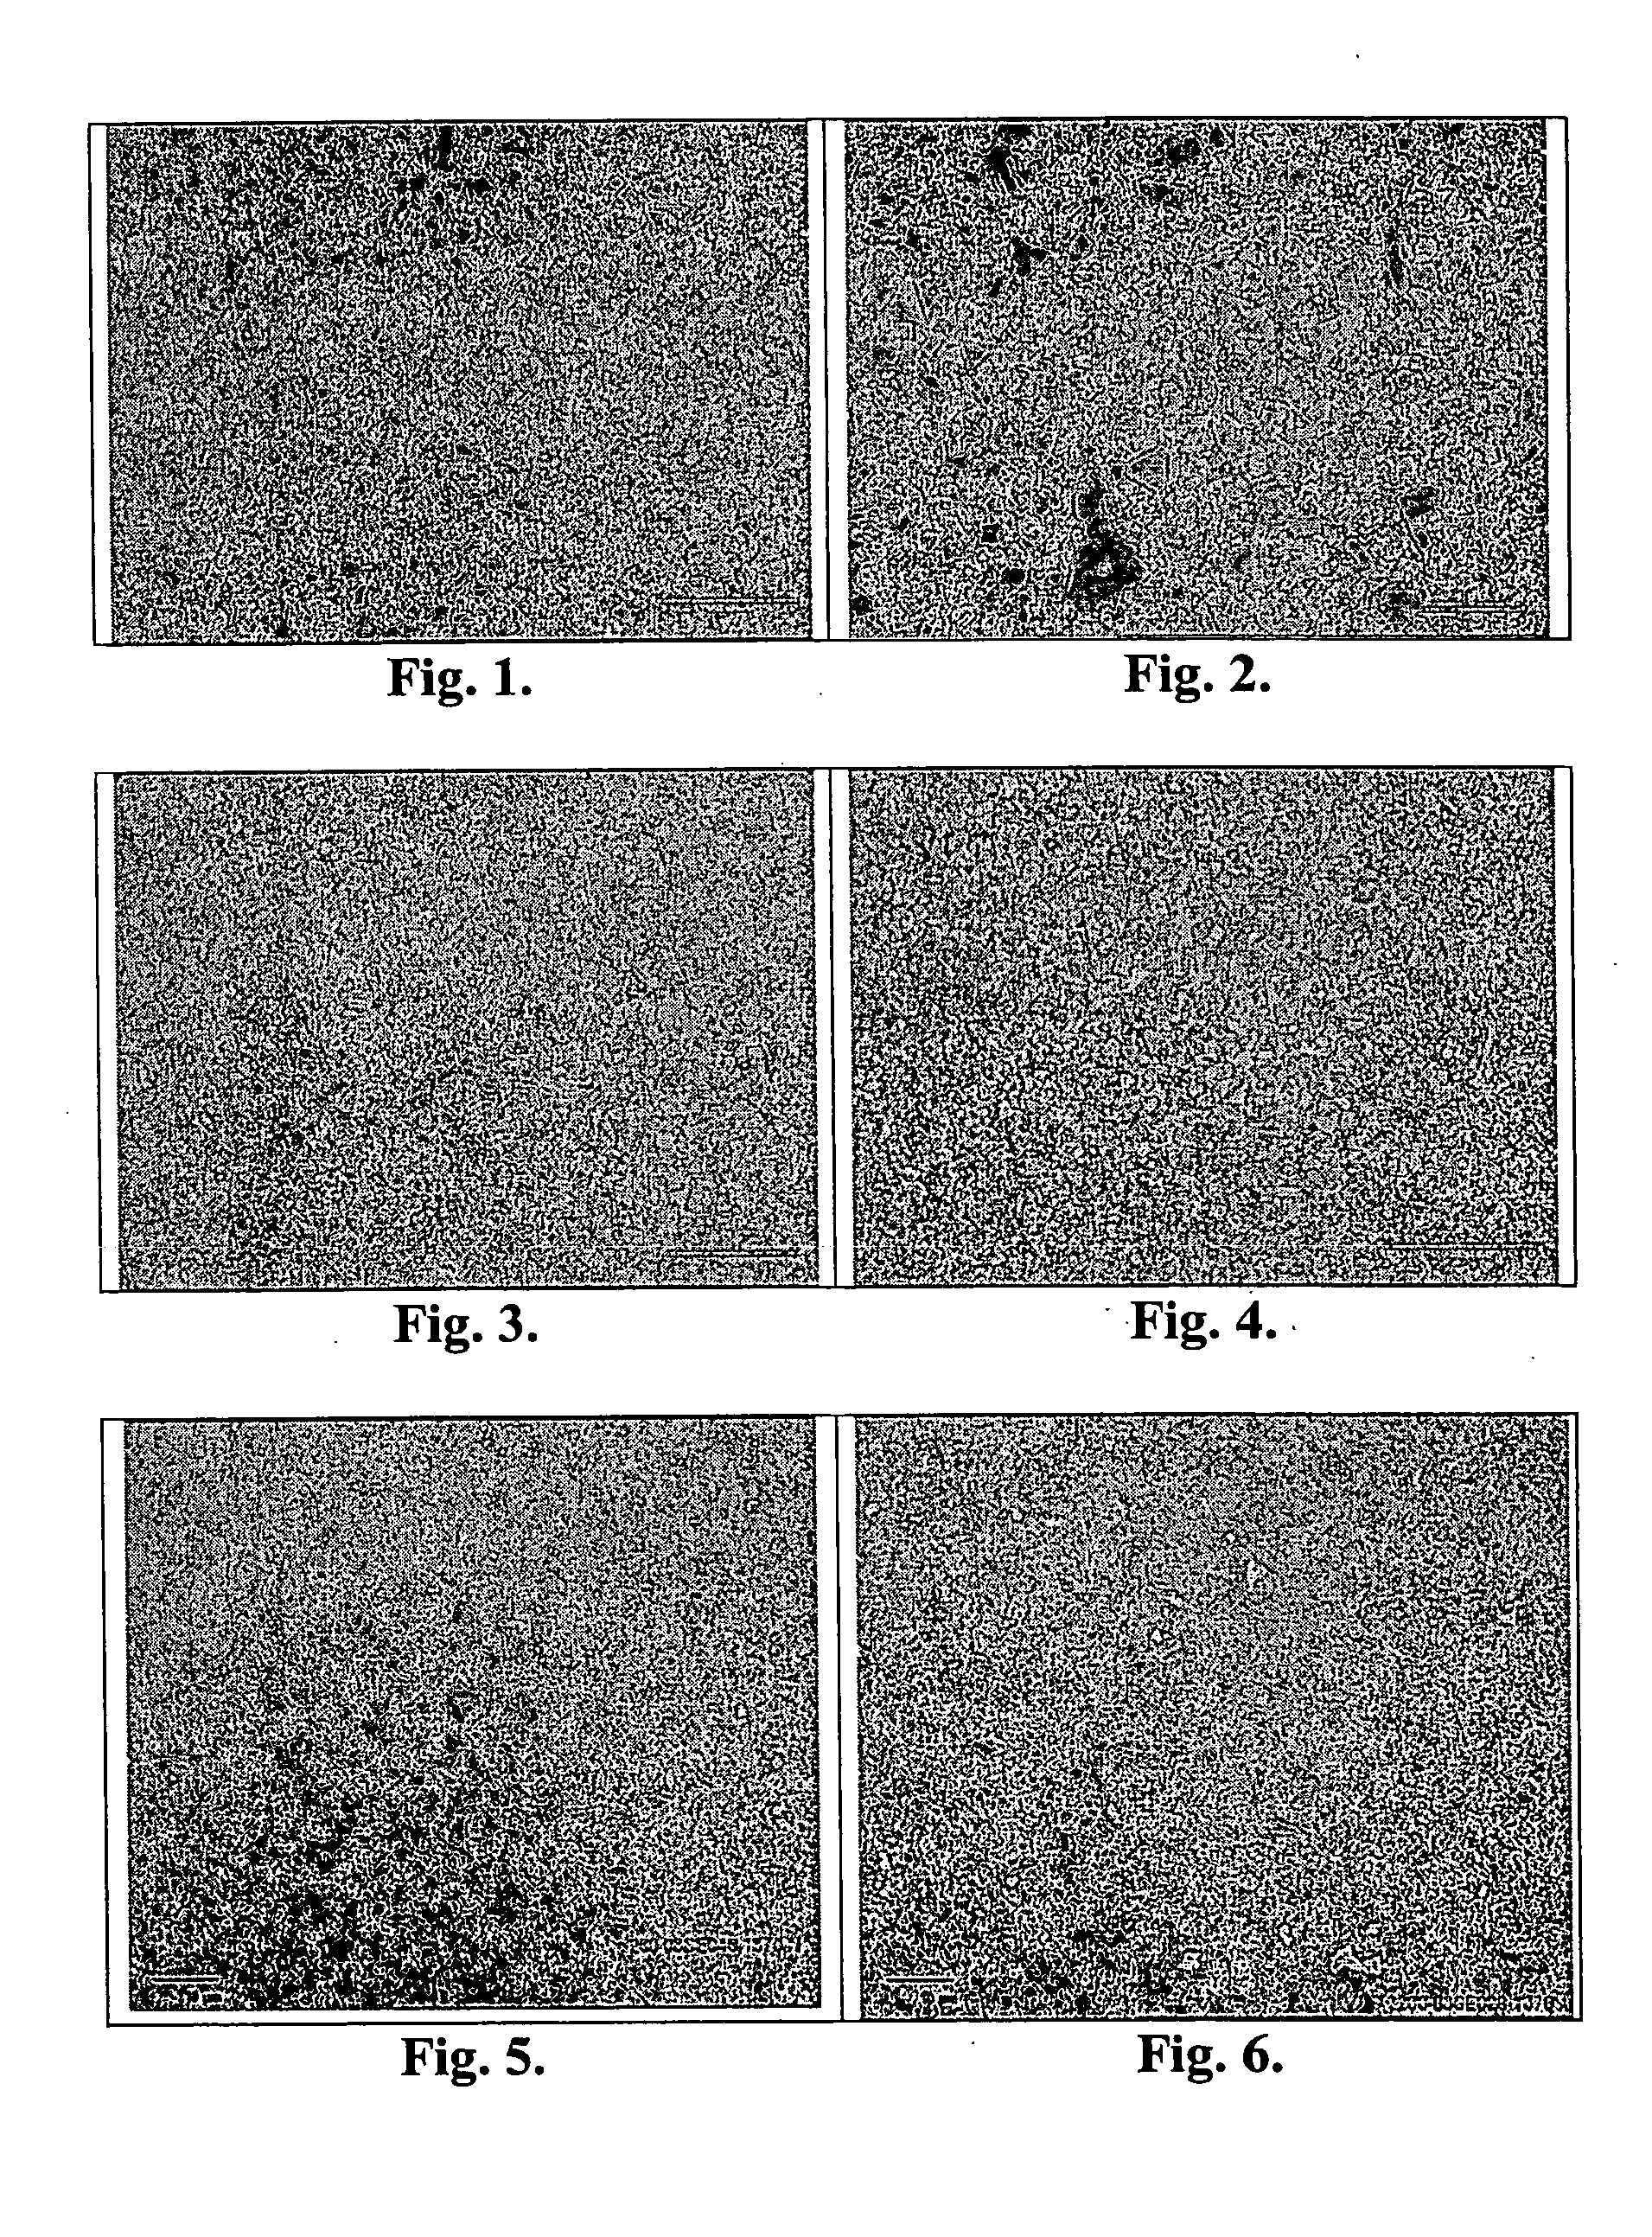 Method of making a fine grained cemented carbide